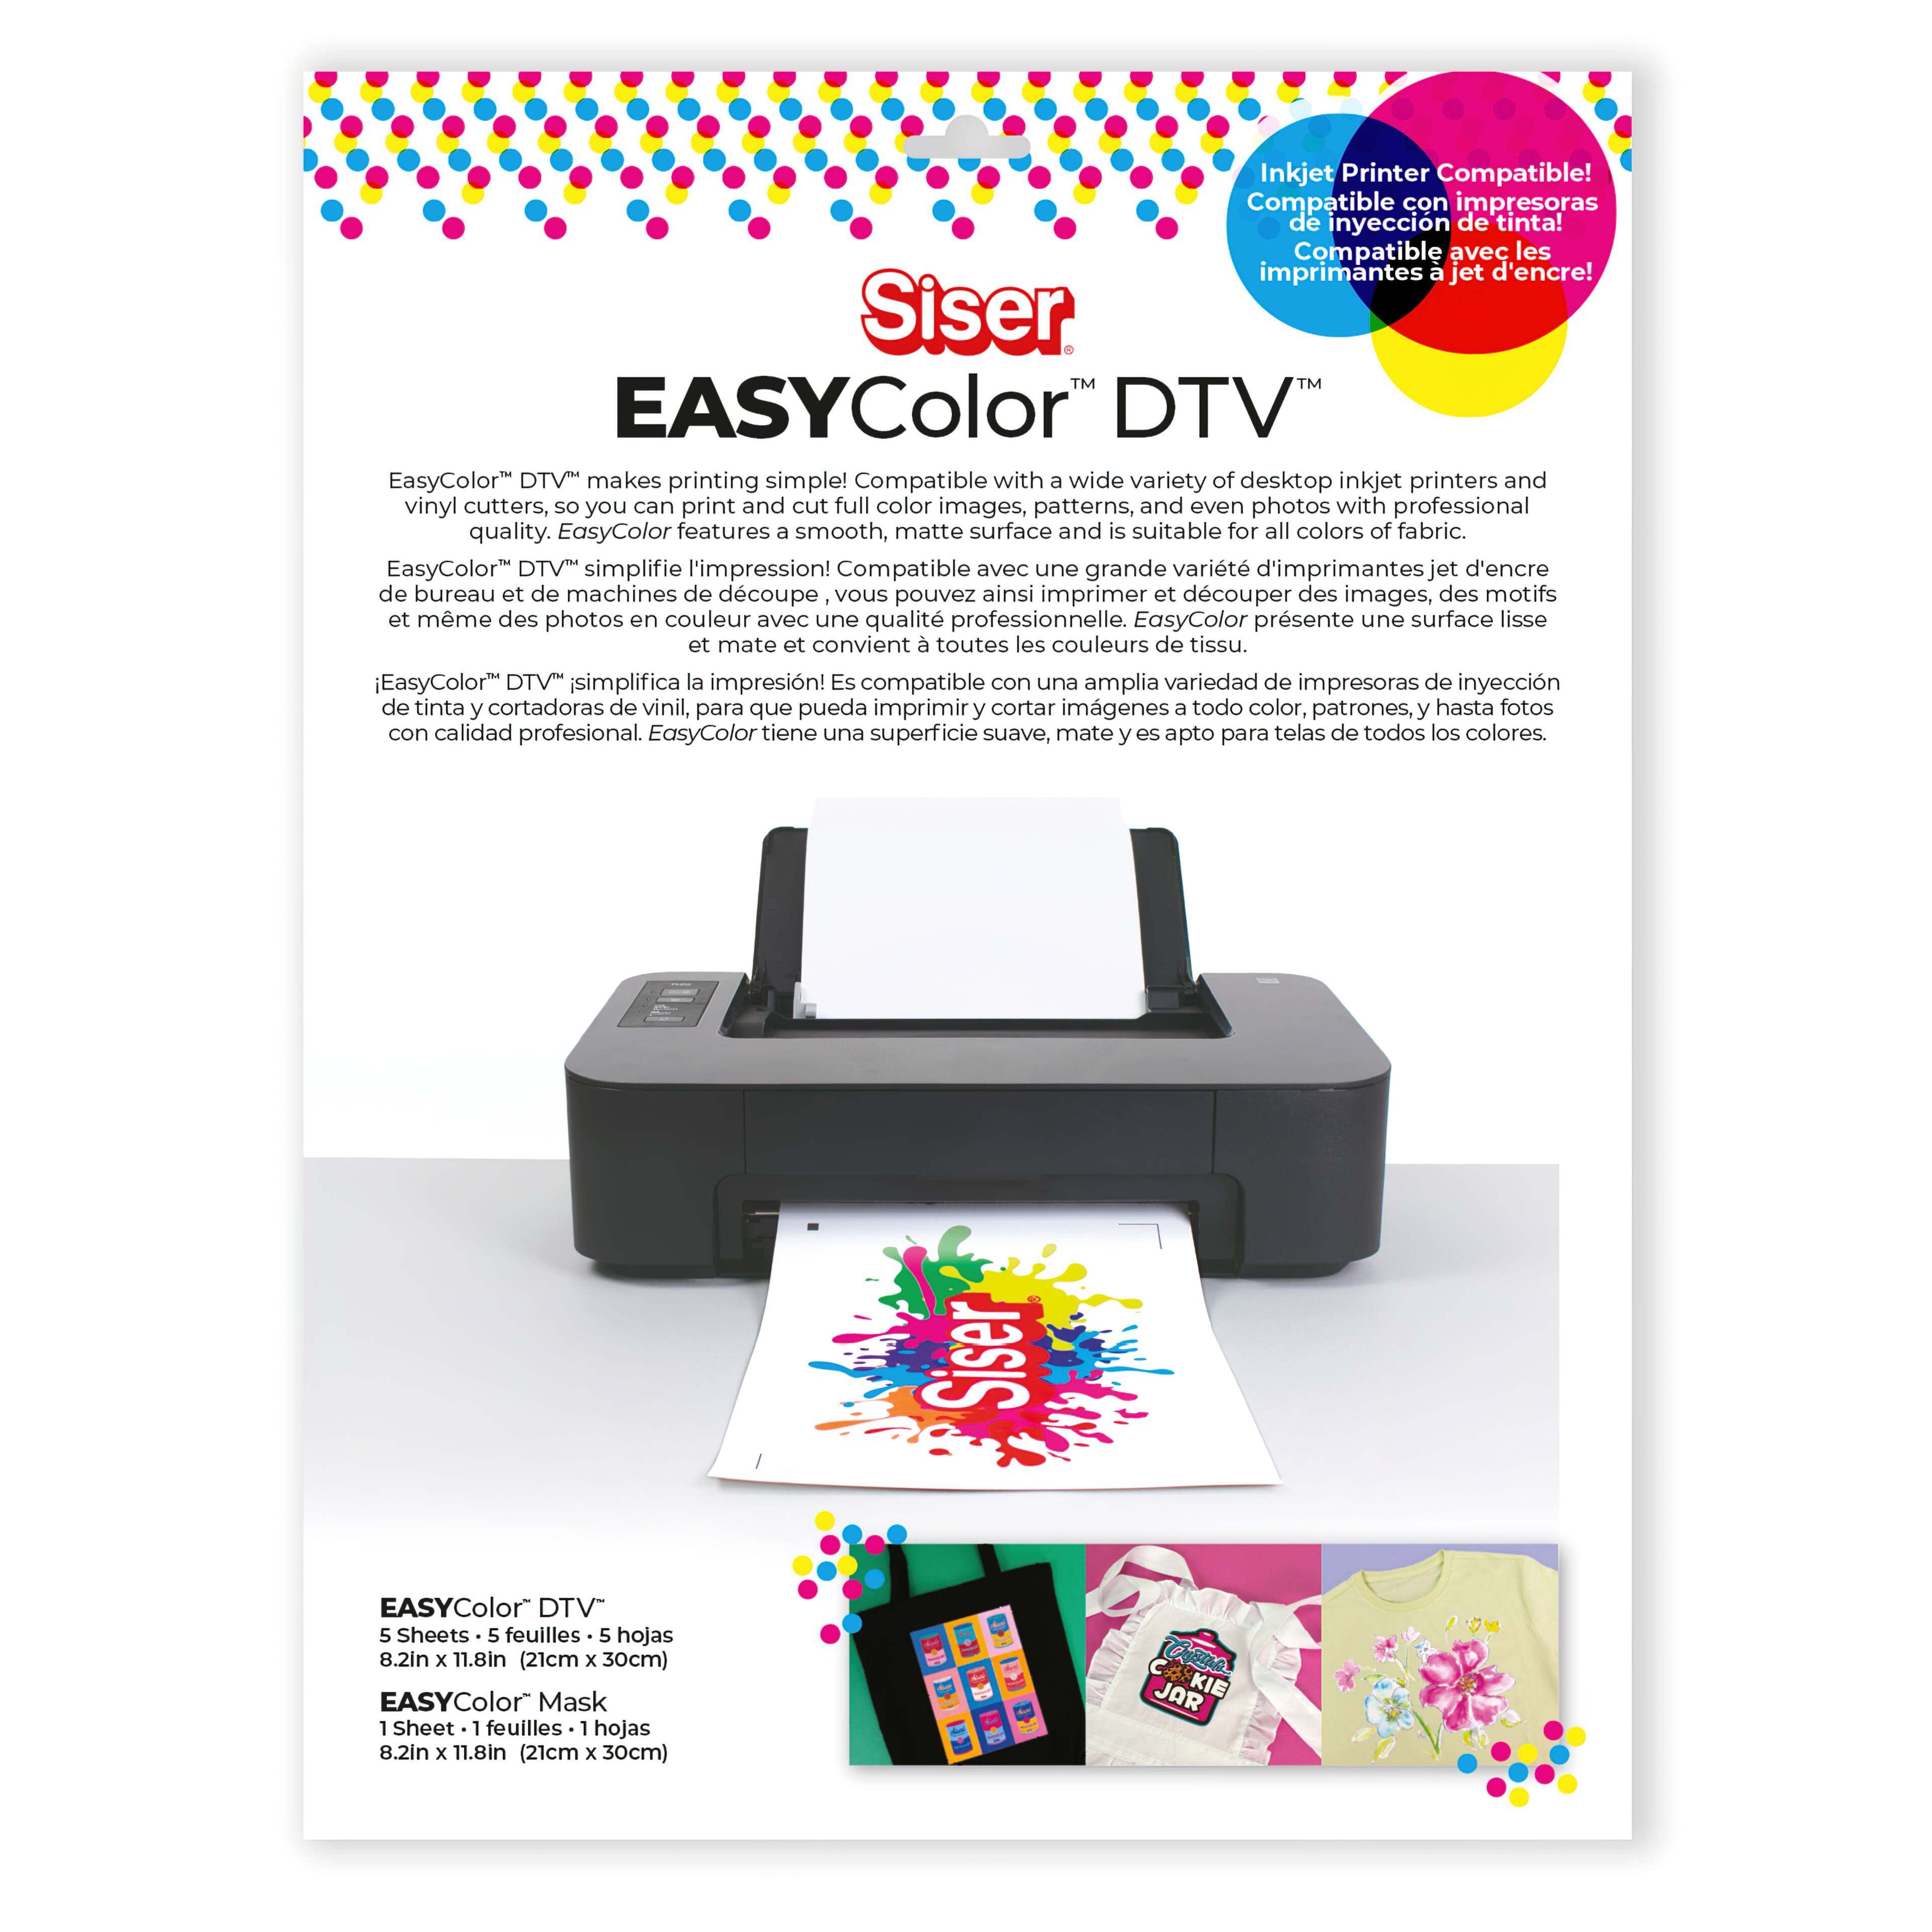 Online How to Use Siser EasyColor DTV on a Sweater Course